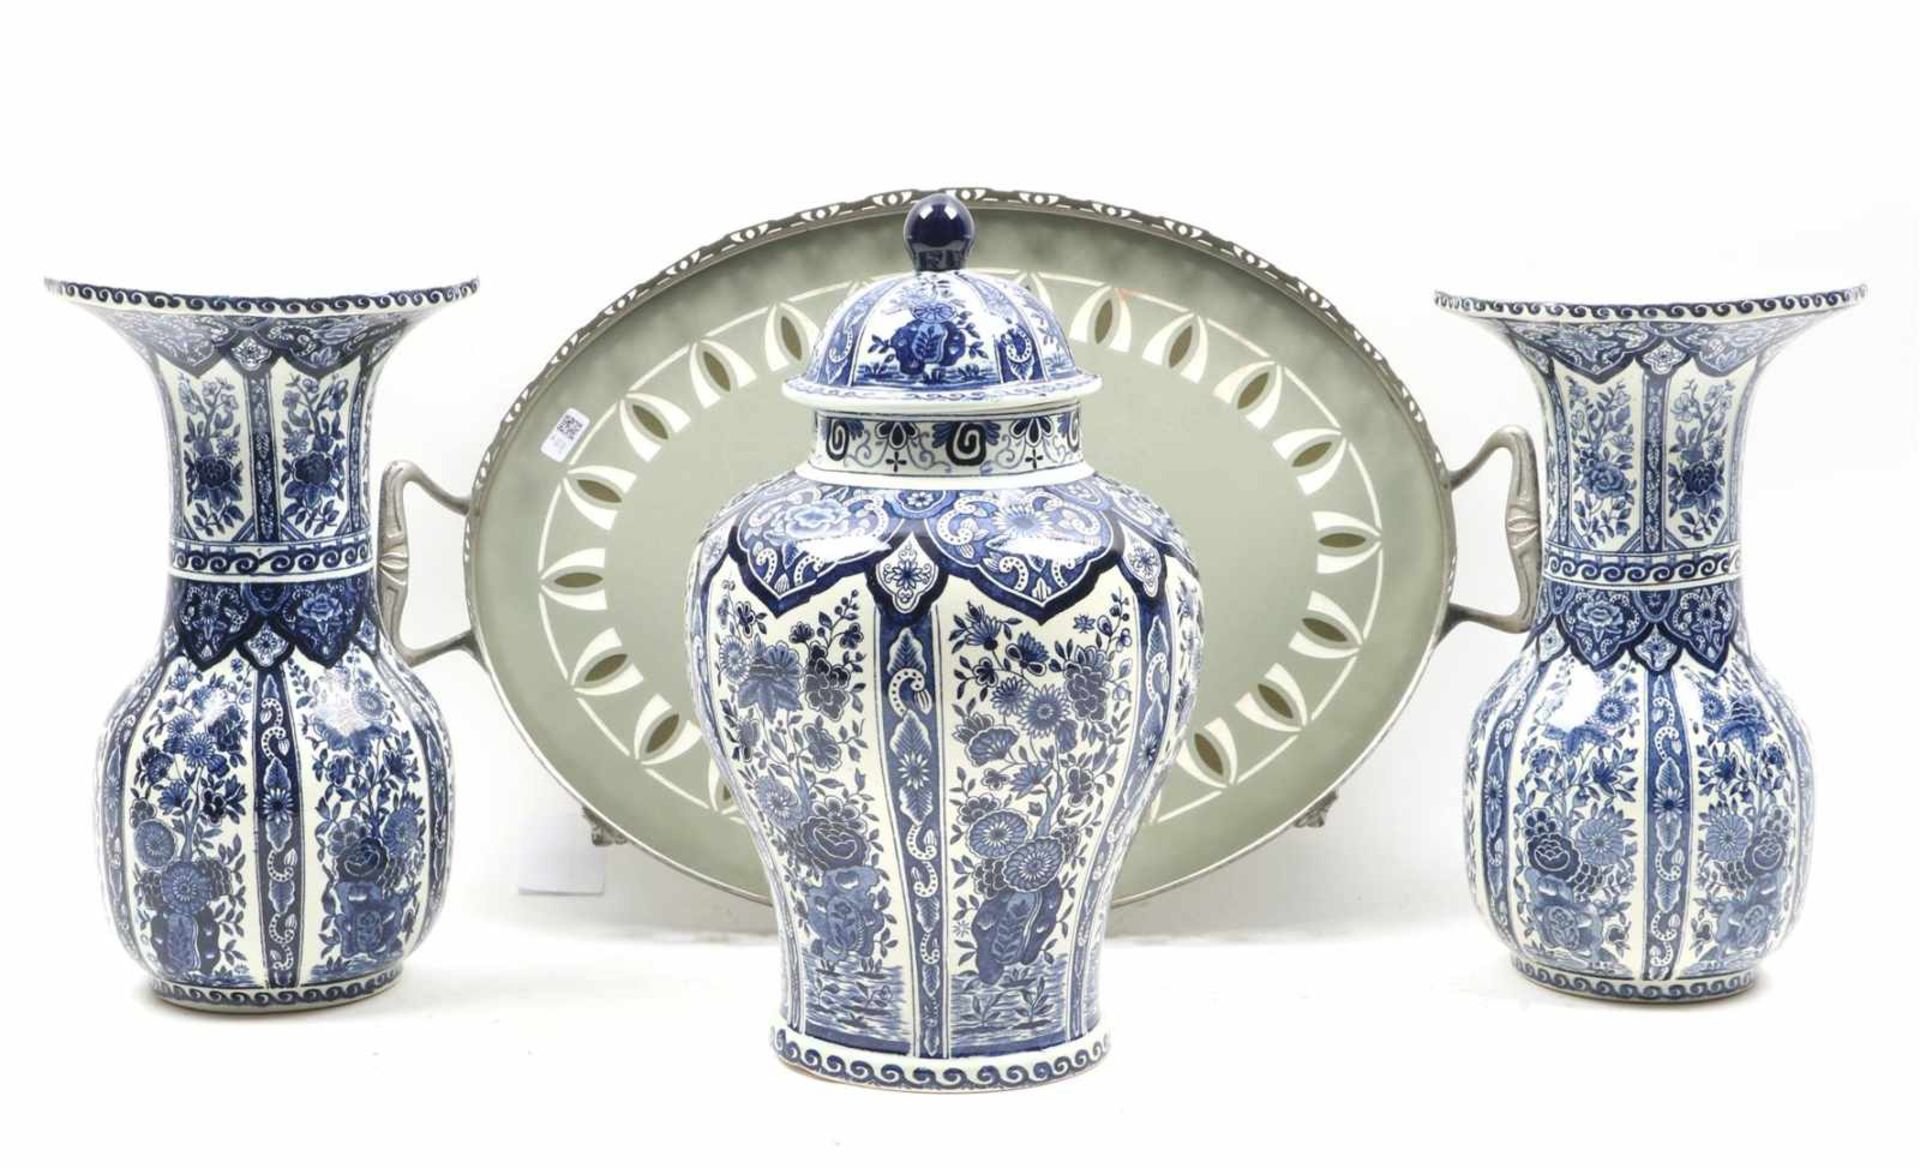 Villeroy and Boch 3-piece earthenware cabinet set with Delft blue decoration 30.5 cm and 34.5 cm